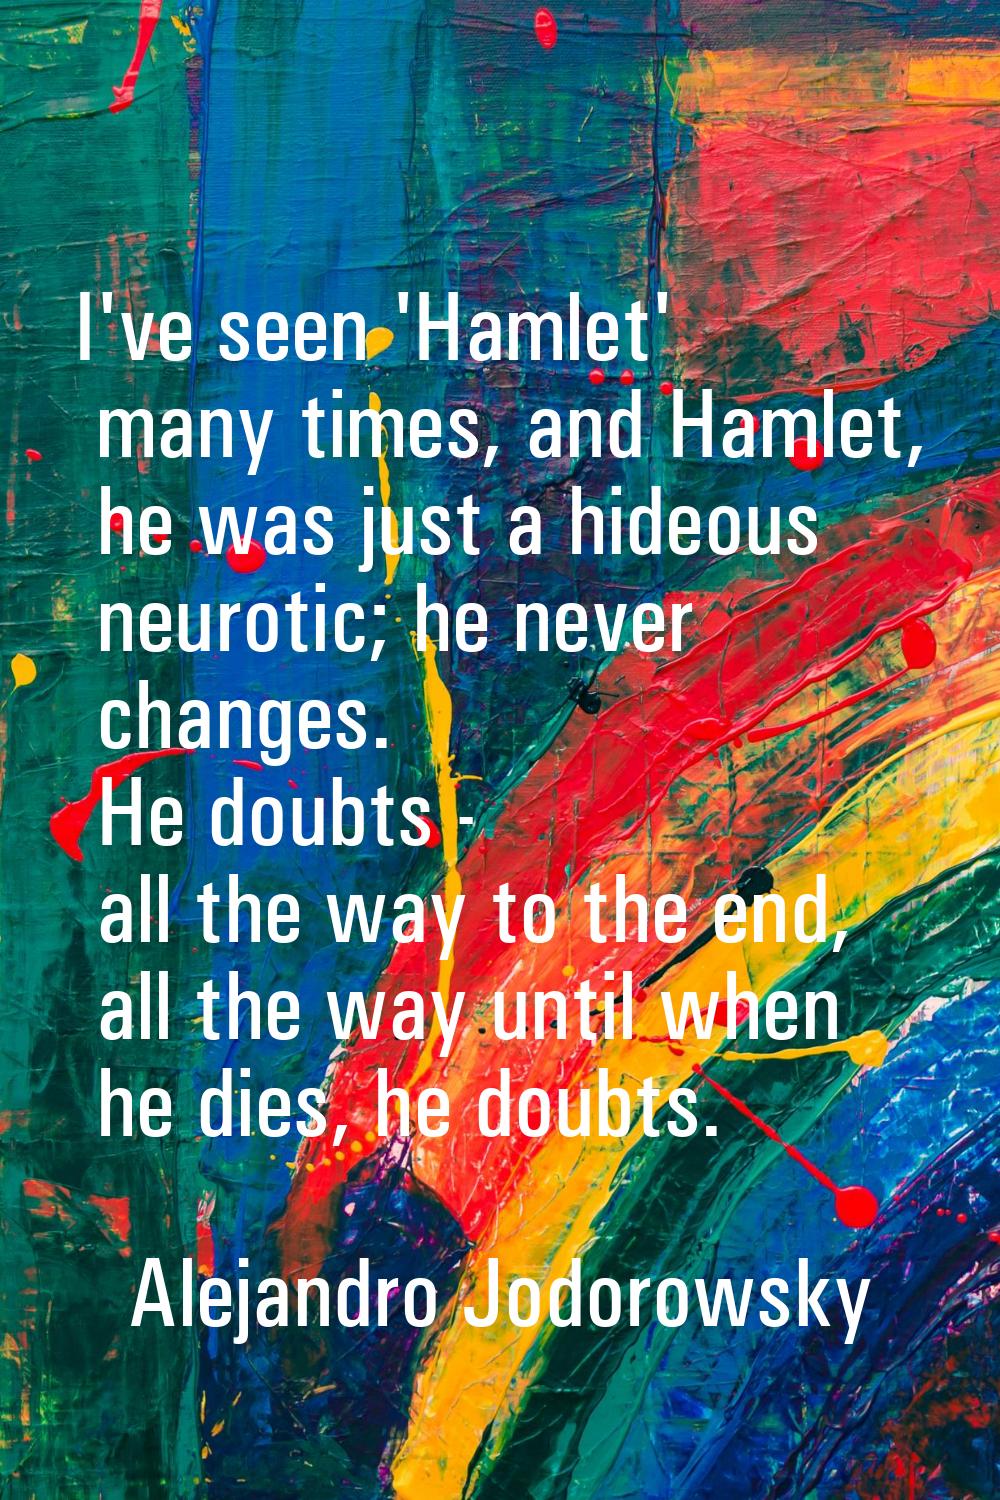 I've seen 'Hamlet' many times, and Hamlet, he was just a hideous neurotic; he never changes. He dou